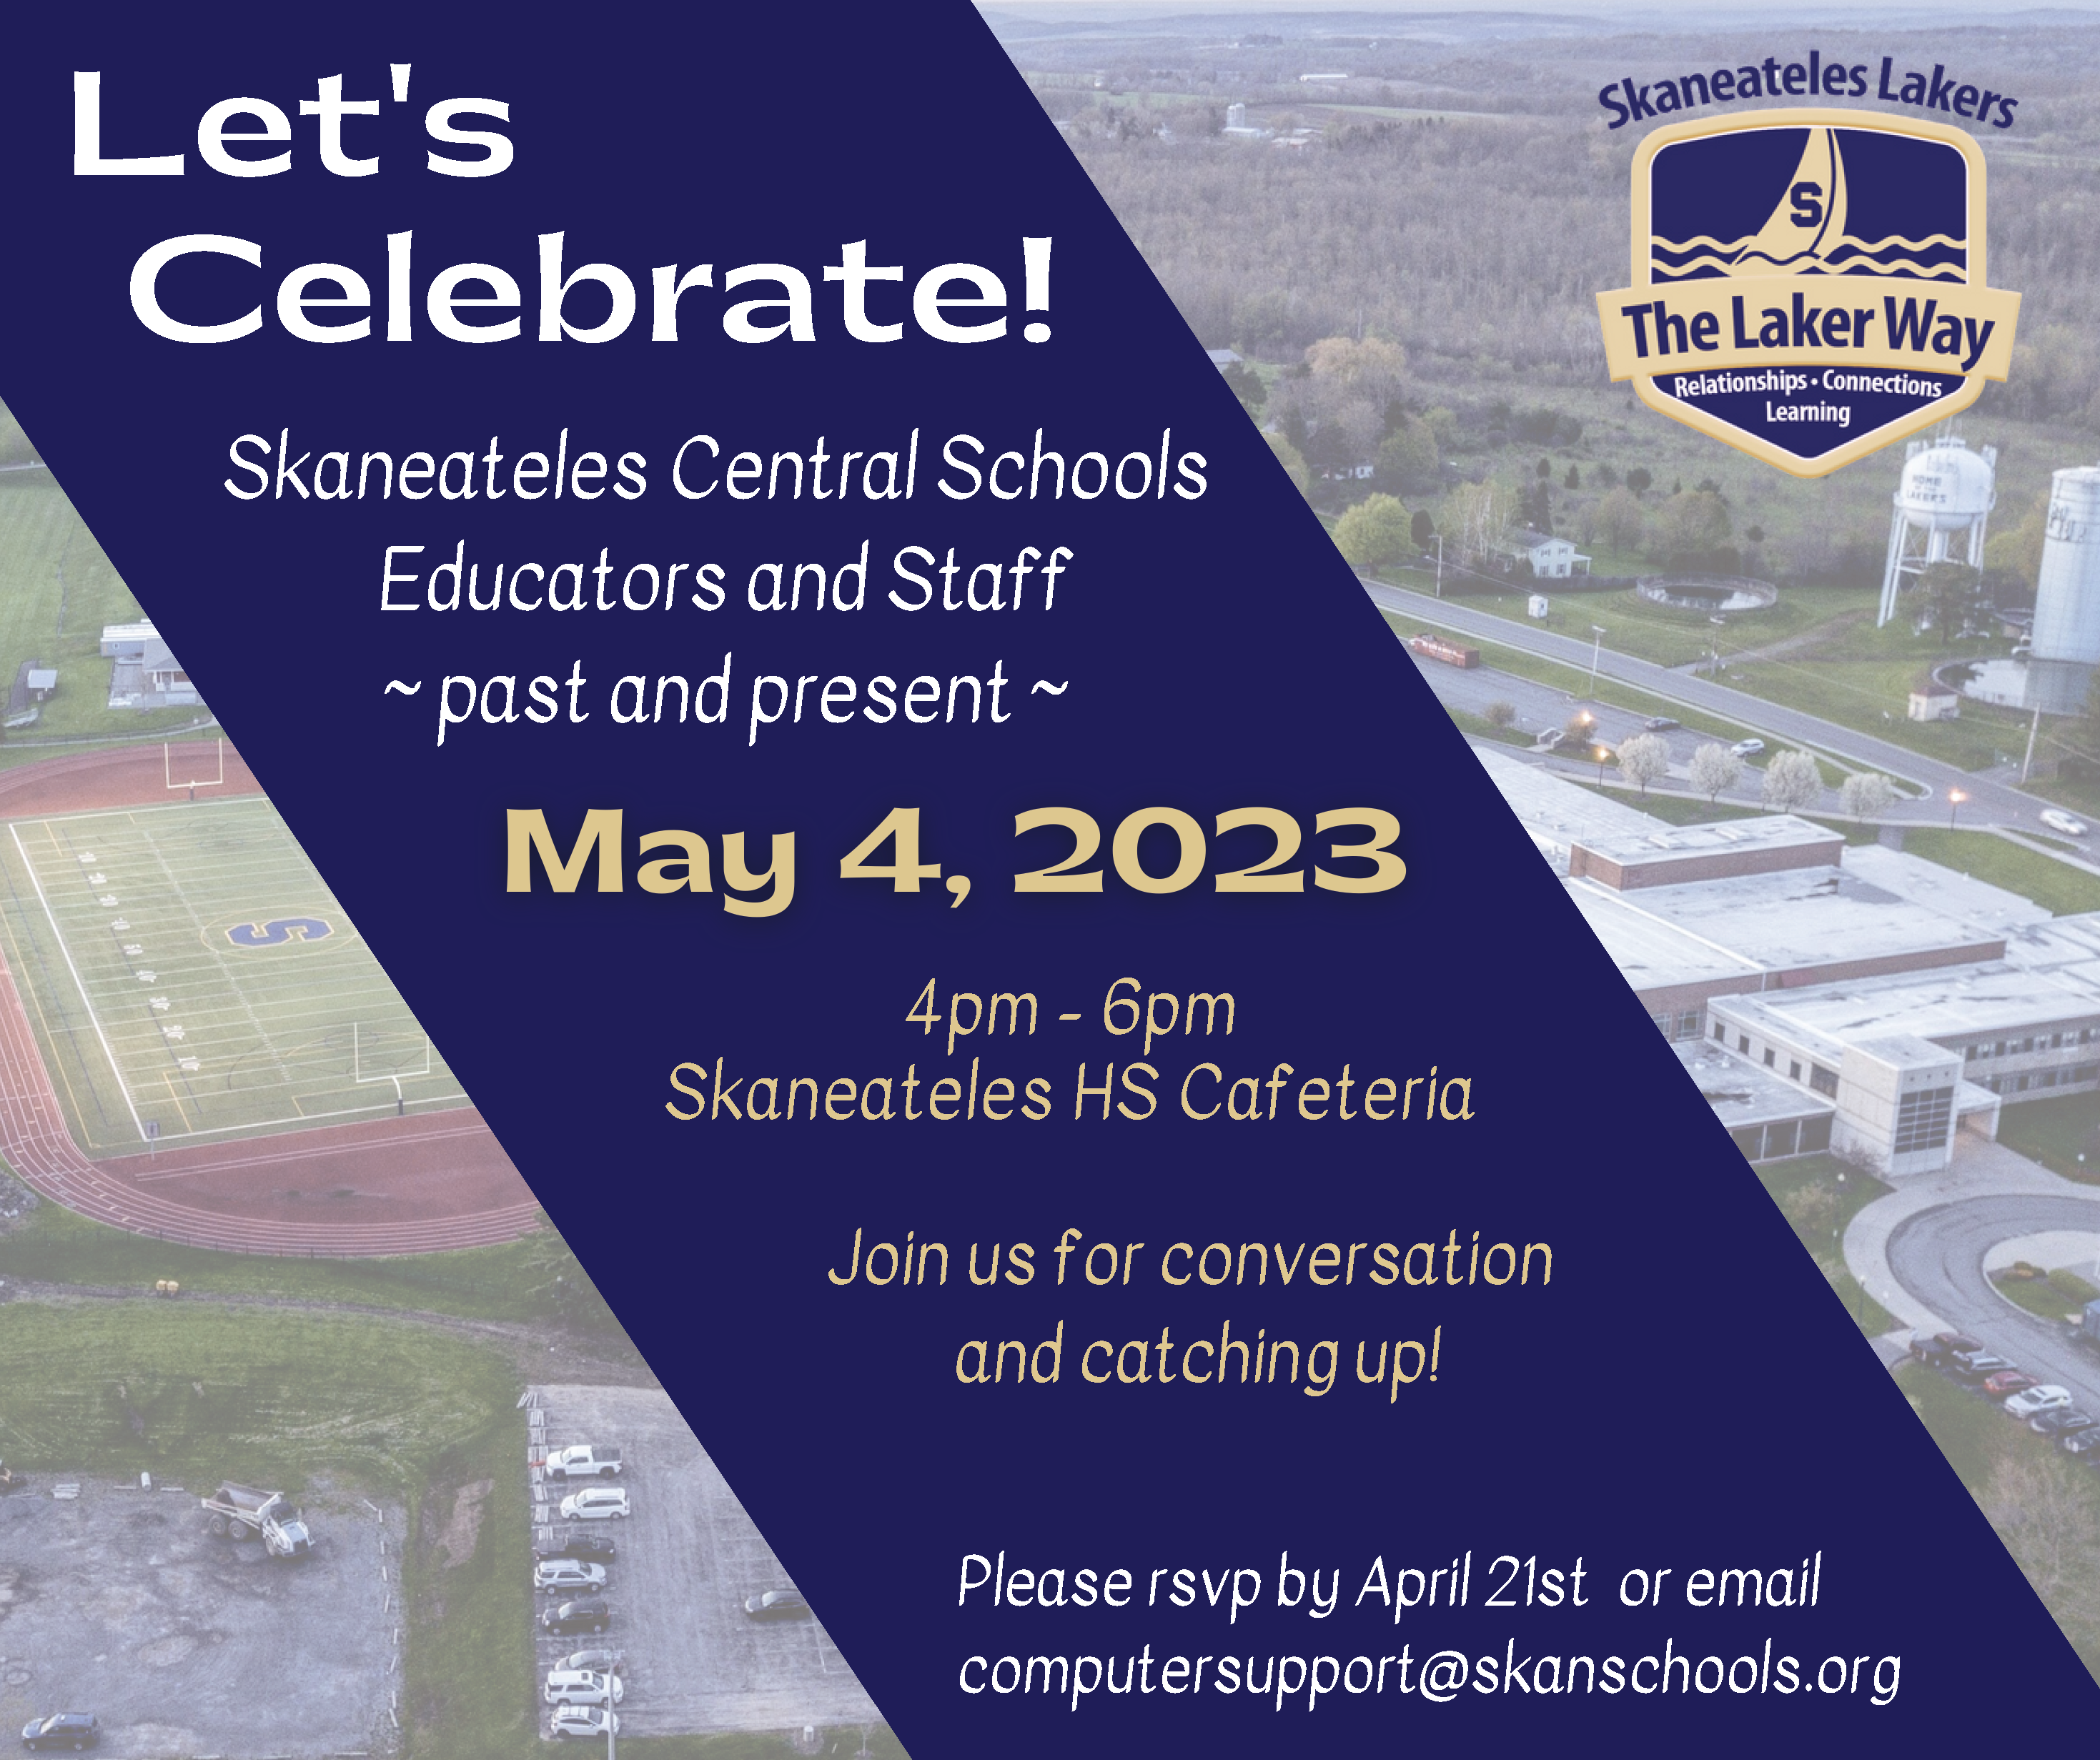 Let's Celebrate! Skaneateles Central School District Educators PAst and Present. May 4, 4-6 p.m.  at the Skaneateles High School Cafeteria. Join us for conversation and to catch up!  Please RSVP by April 21st or email computersupport@skanschools.org